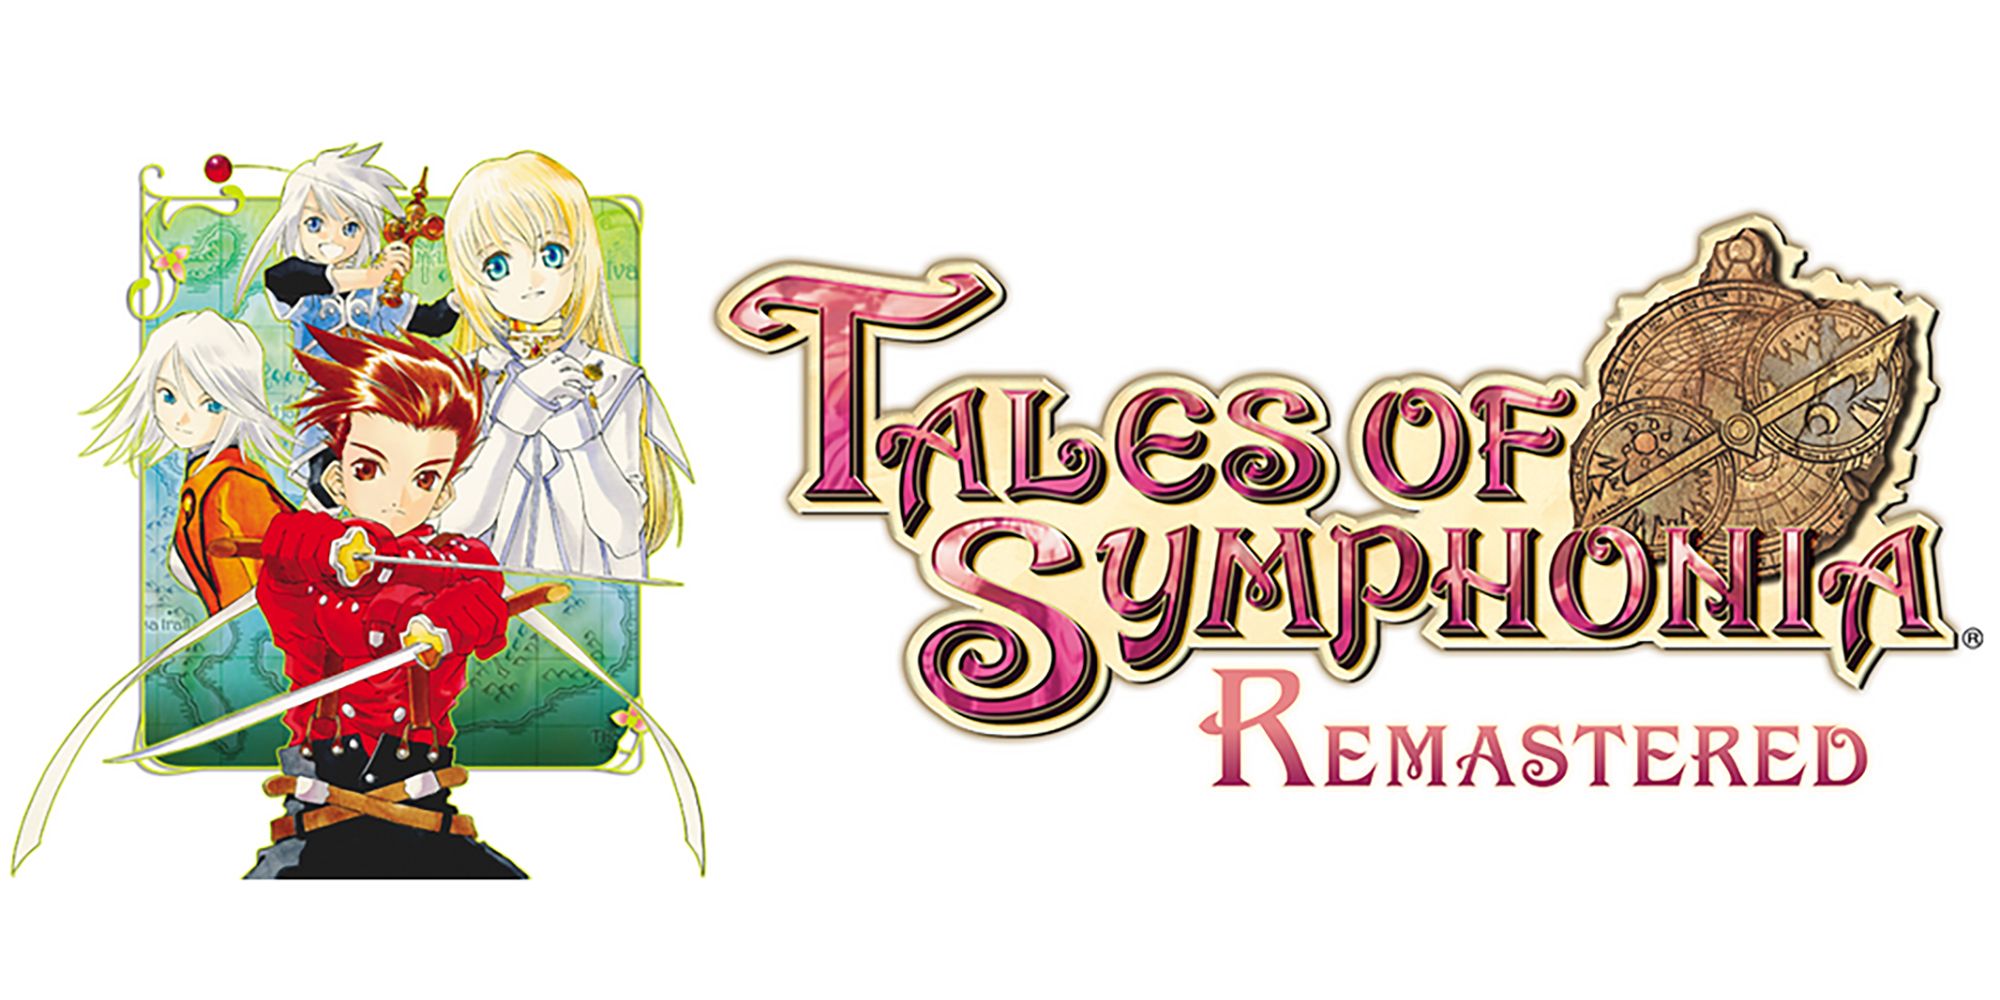 tales of symphonia remastered - logo shot - lloyd, collete, genis, and raine 